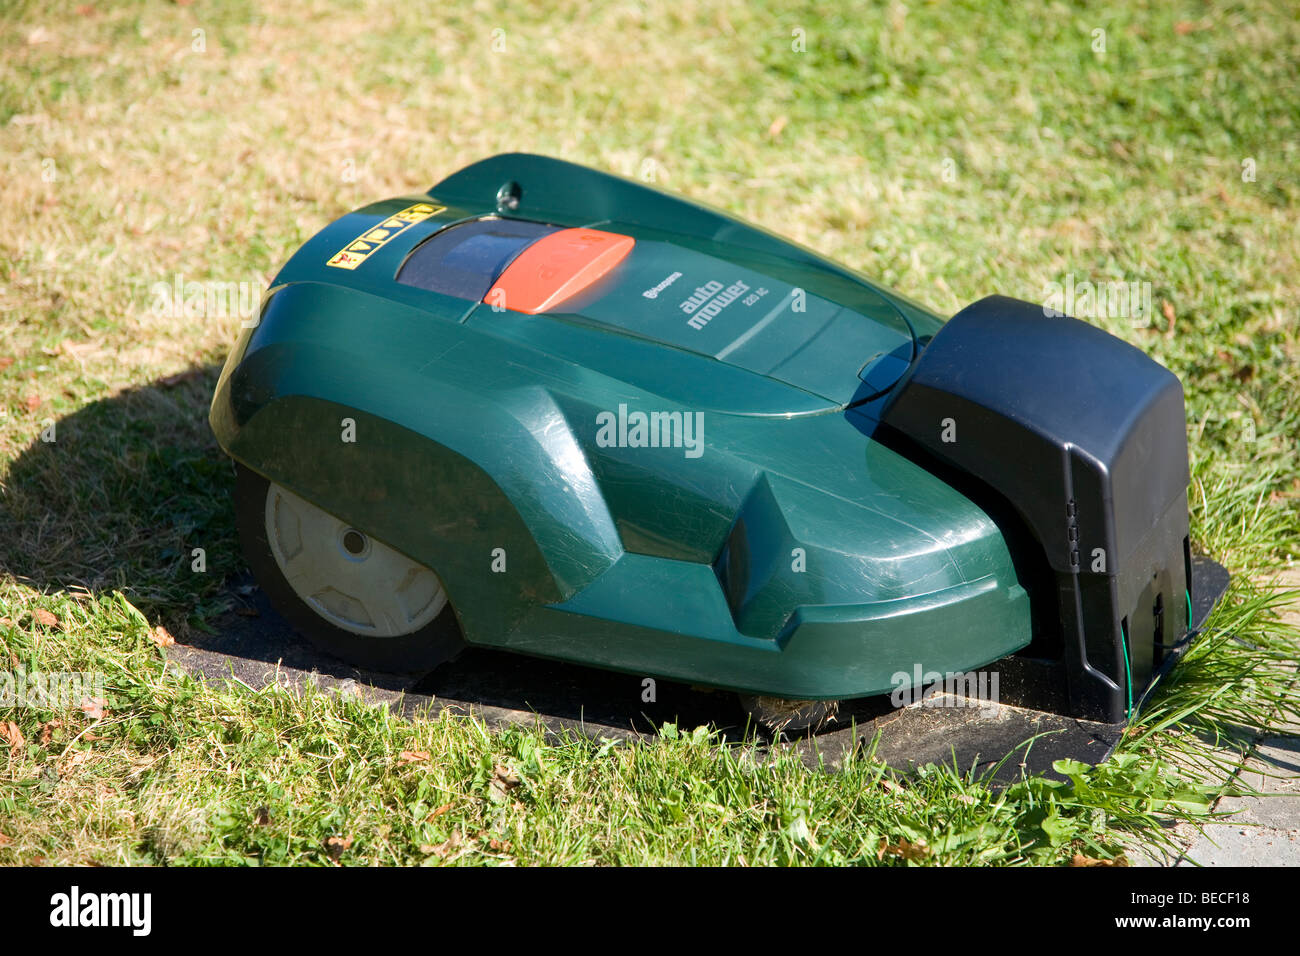 Green automatic robot lawnmower docked in its charging station, top view Stock Photo